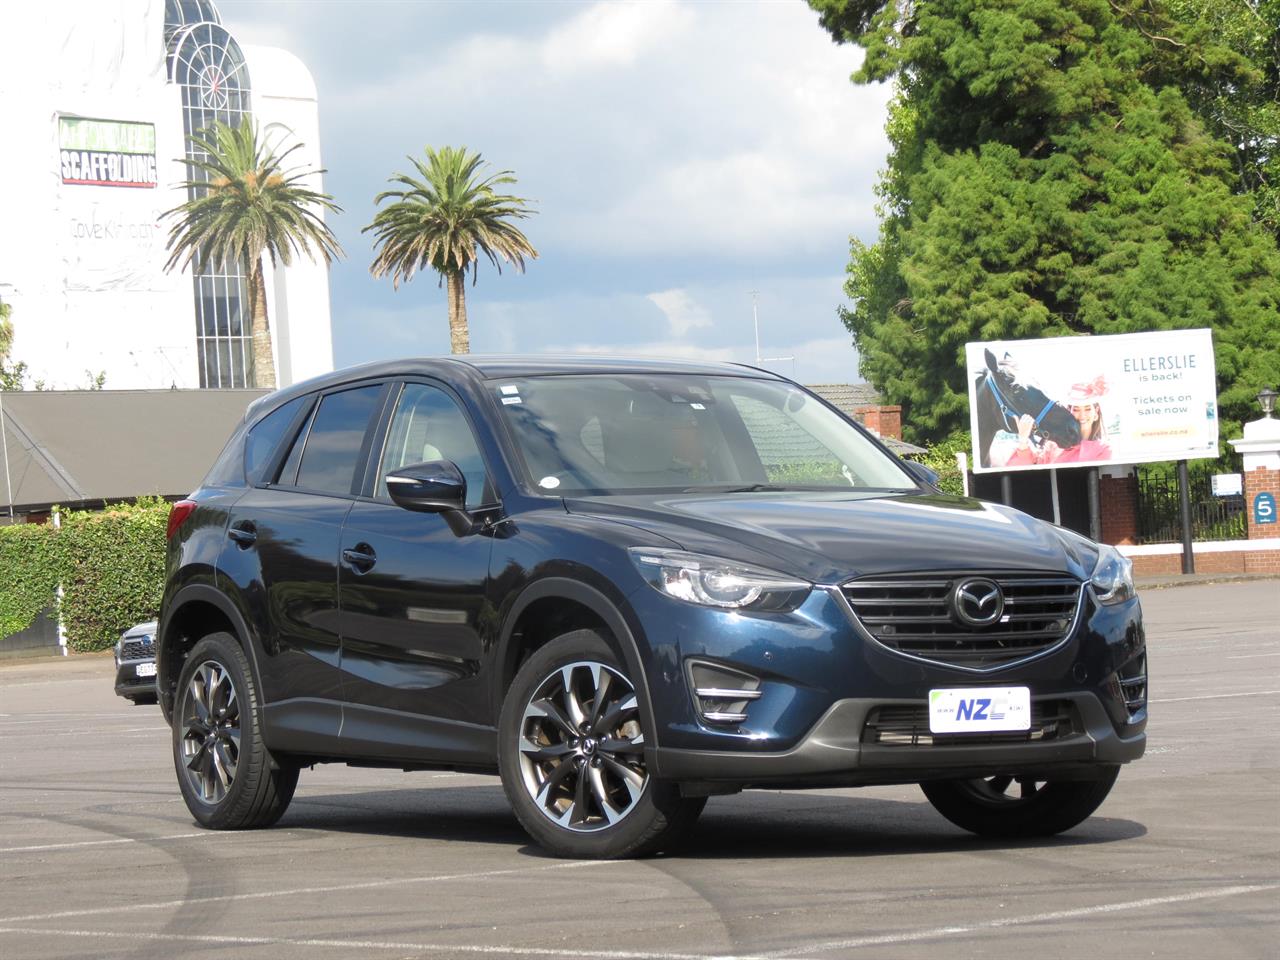 NZC best hot price for 2015 Mazda CX-5 in Auckland